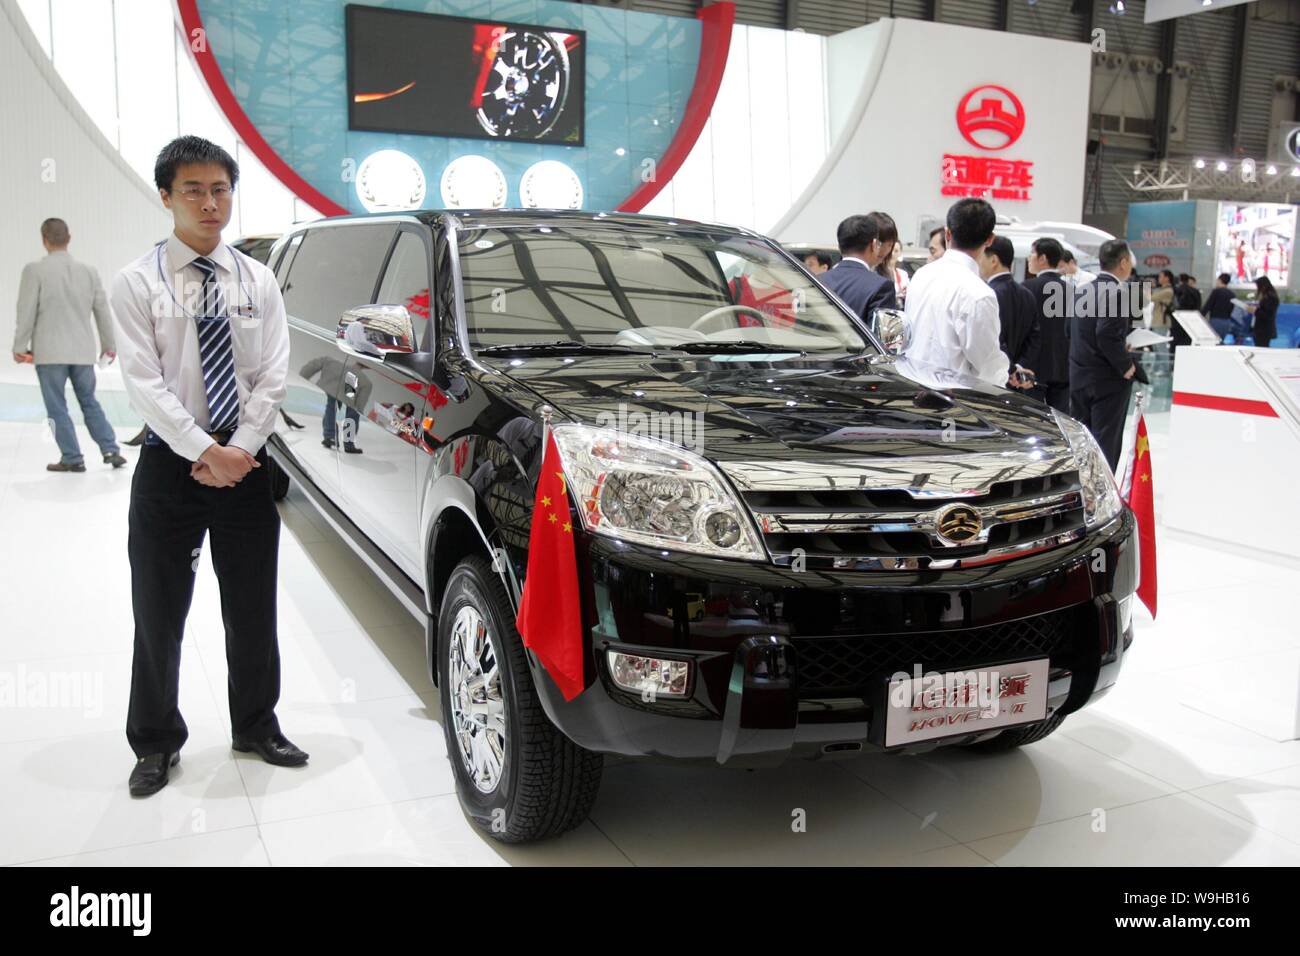 A Great Wall Hover Pi is exhibited at Auto Shanghai 2007 in Shanghai 21 April 2007. Over 1,300 exhibitors from 20 countries and regions attend the Sha Stock Photo